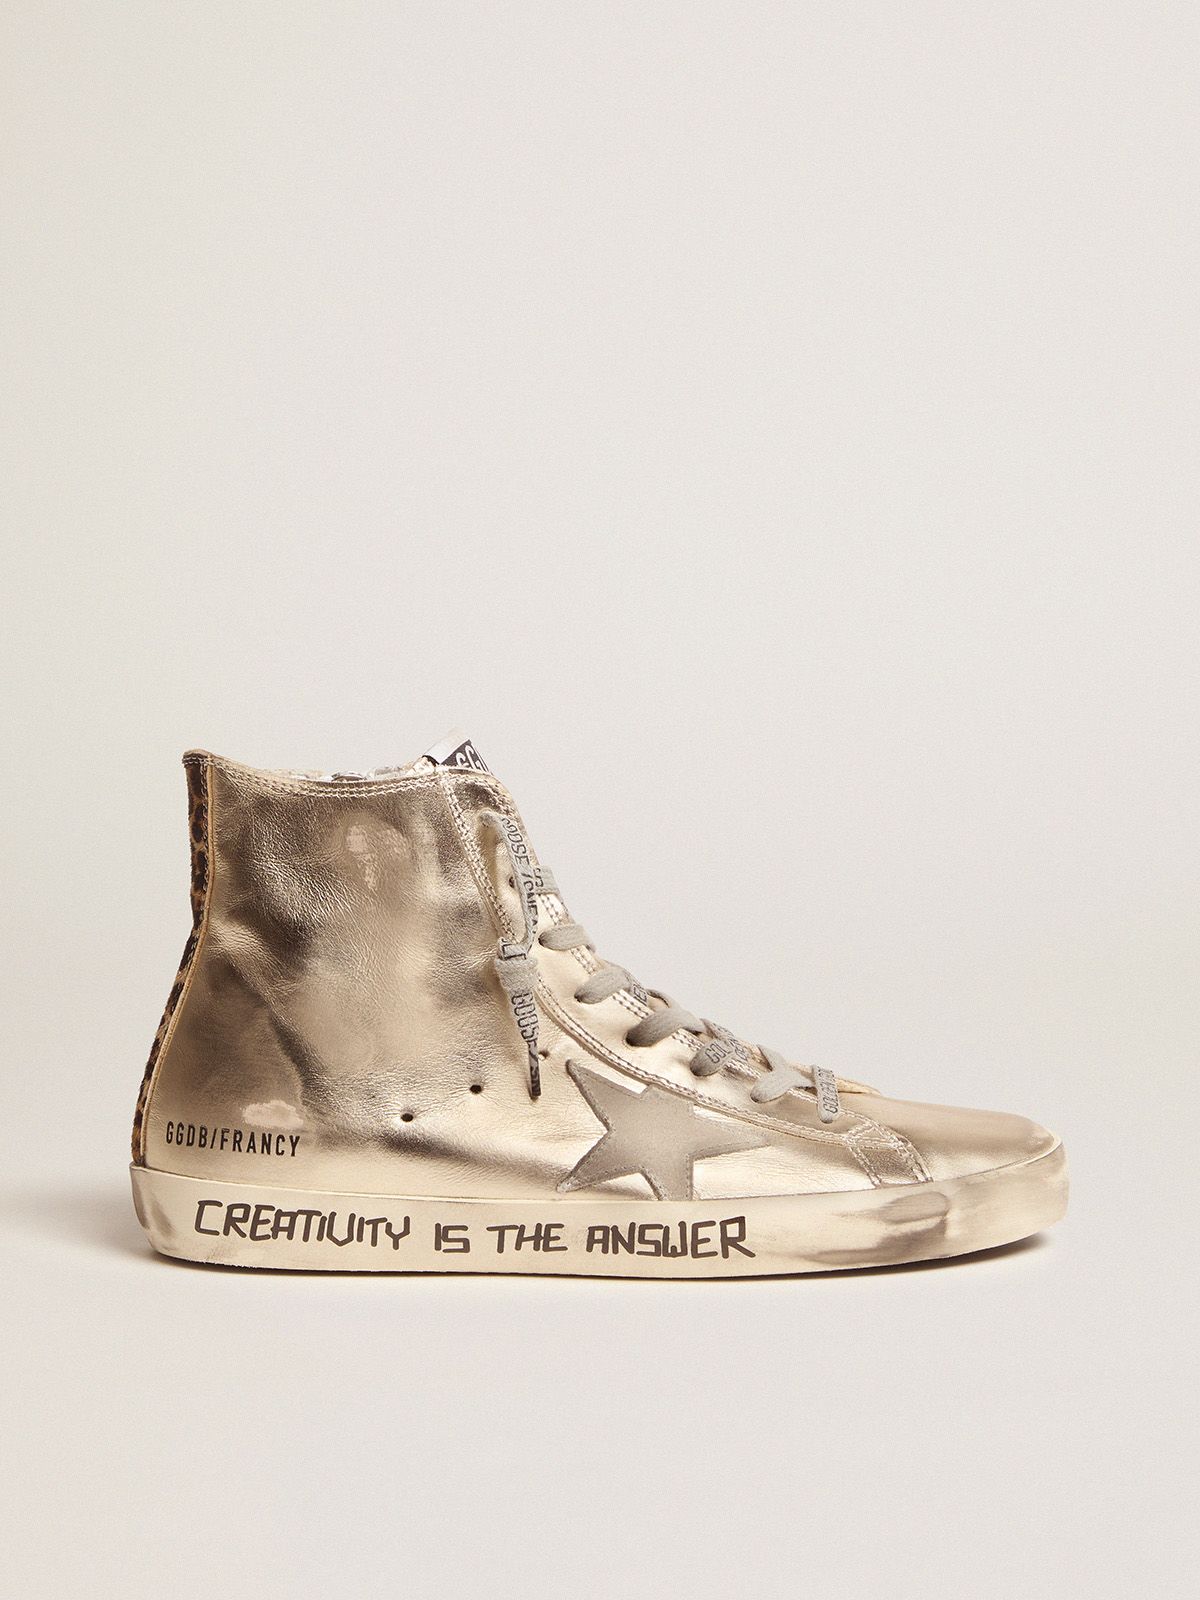 Golden Goose Uomo Saldi Gold Francy sneakers with handwritten lettering and leopard-print detail